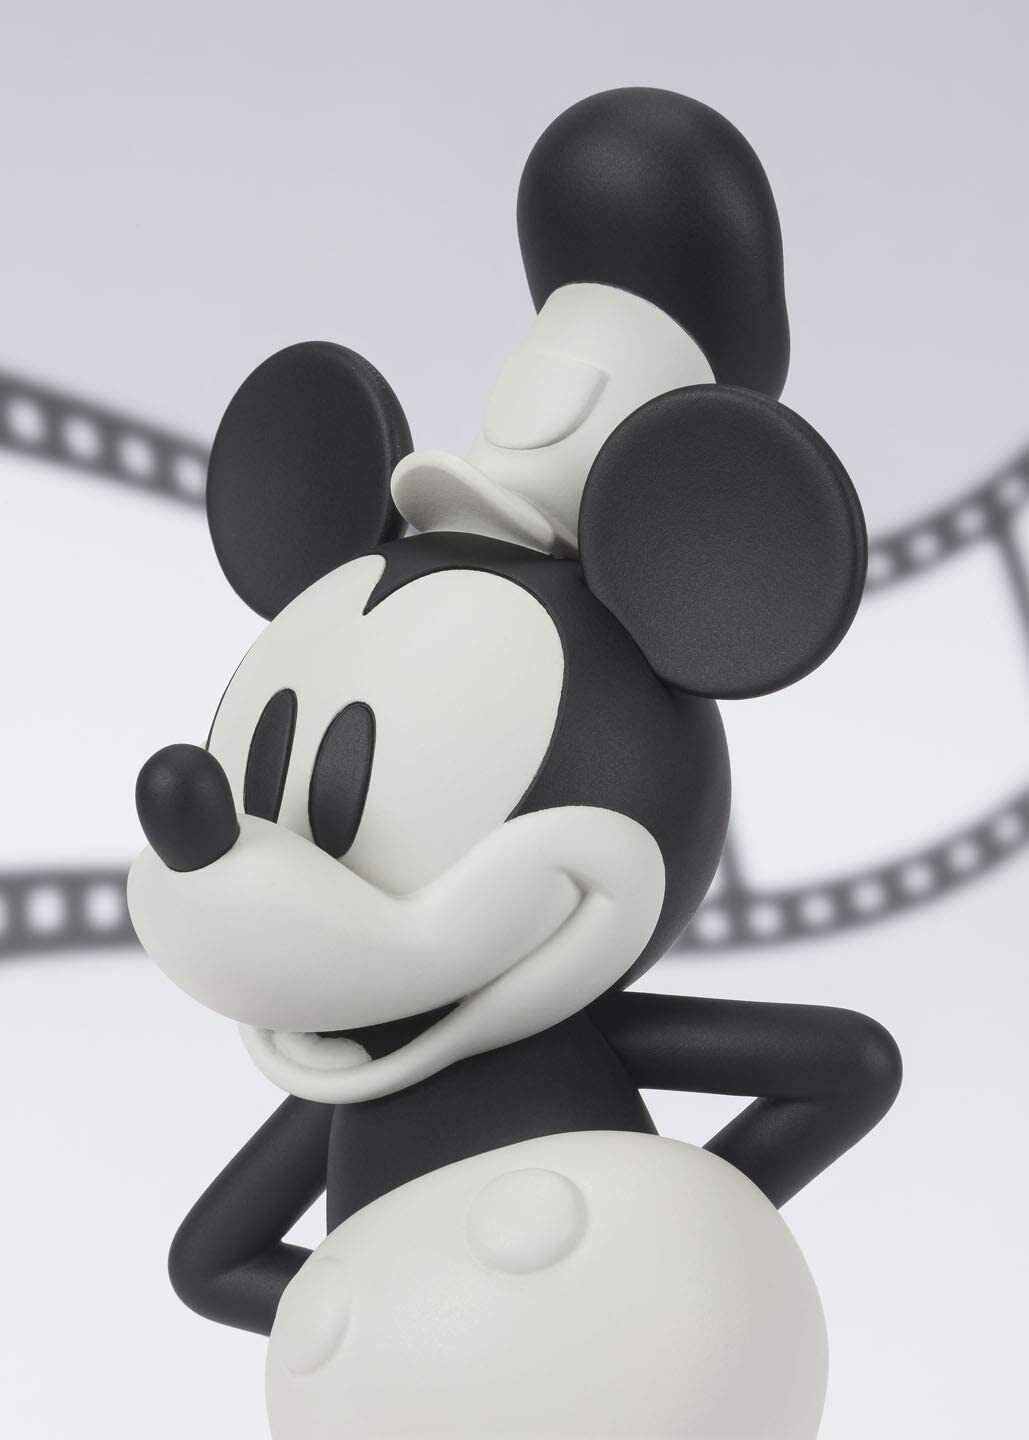 Figuarts Zero Mickey Mouse Steamboat Willie 90th Anniversary Limited Edition Disney